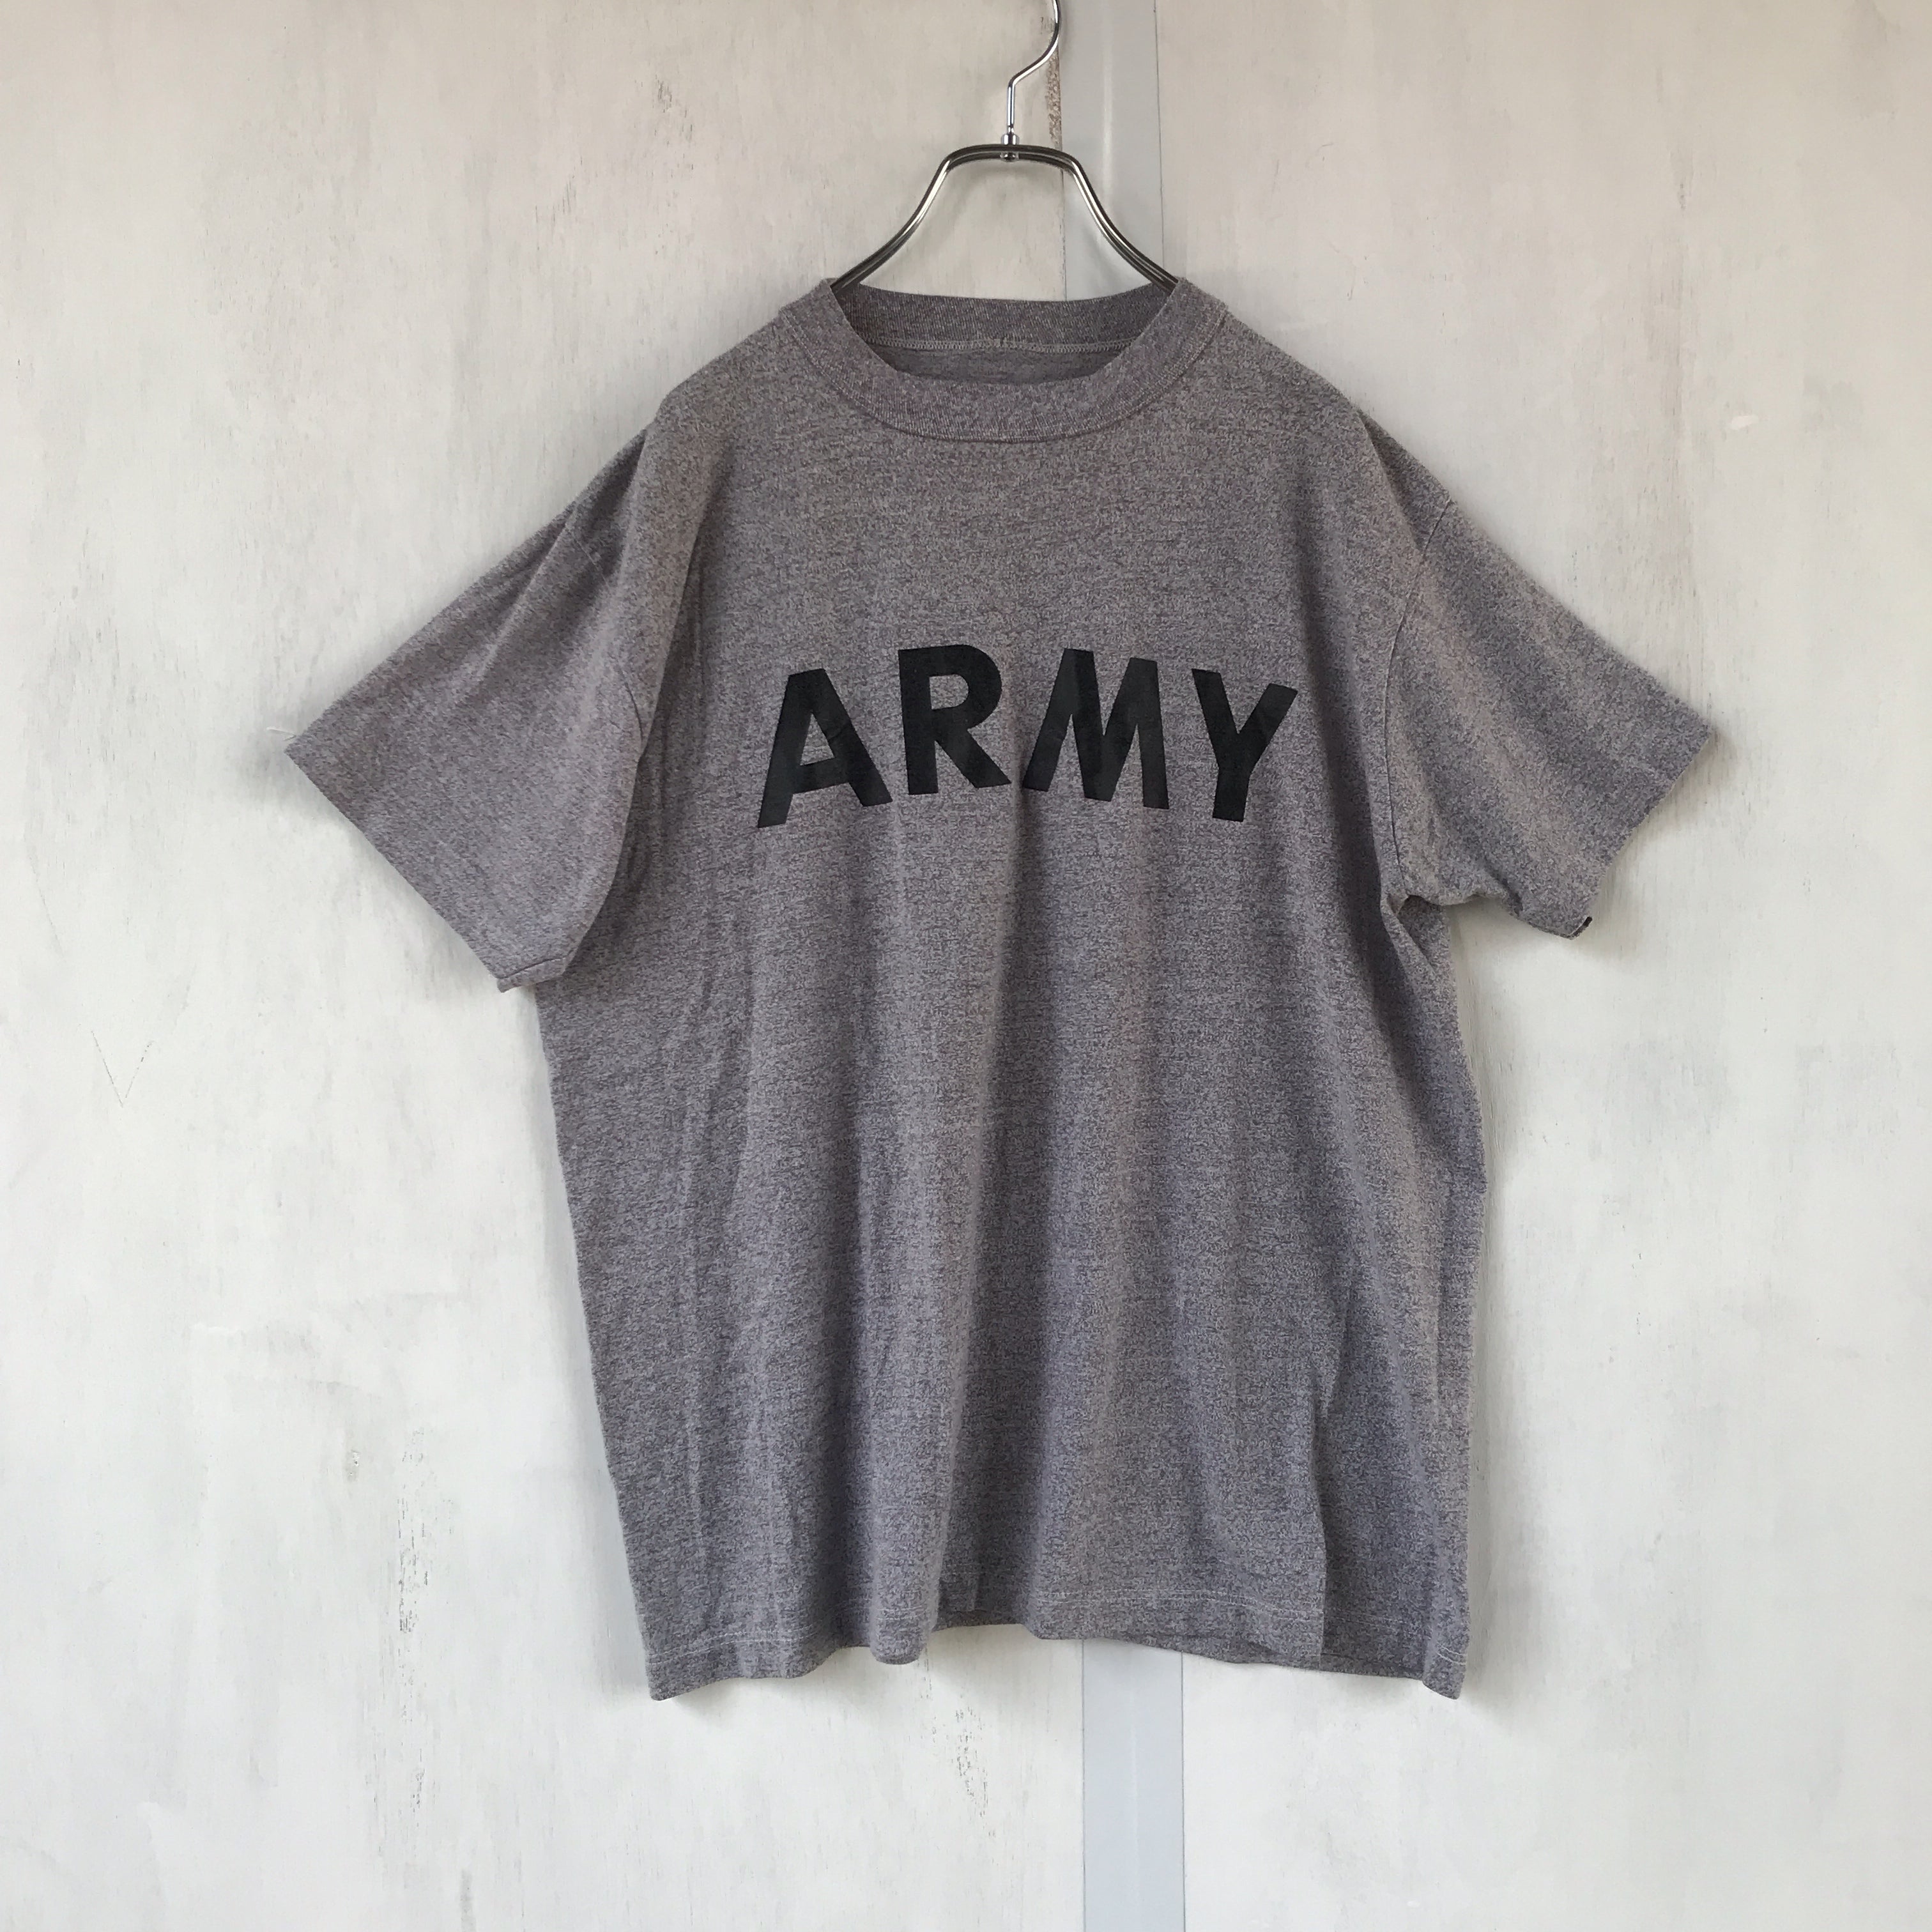 U.S.ARMY SHORT SLEEVE T-SHIRT / Mr.Clean Select